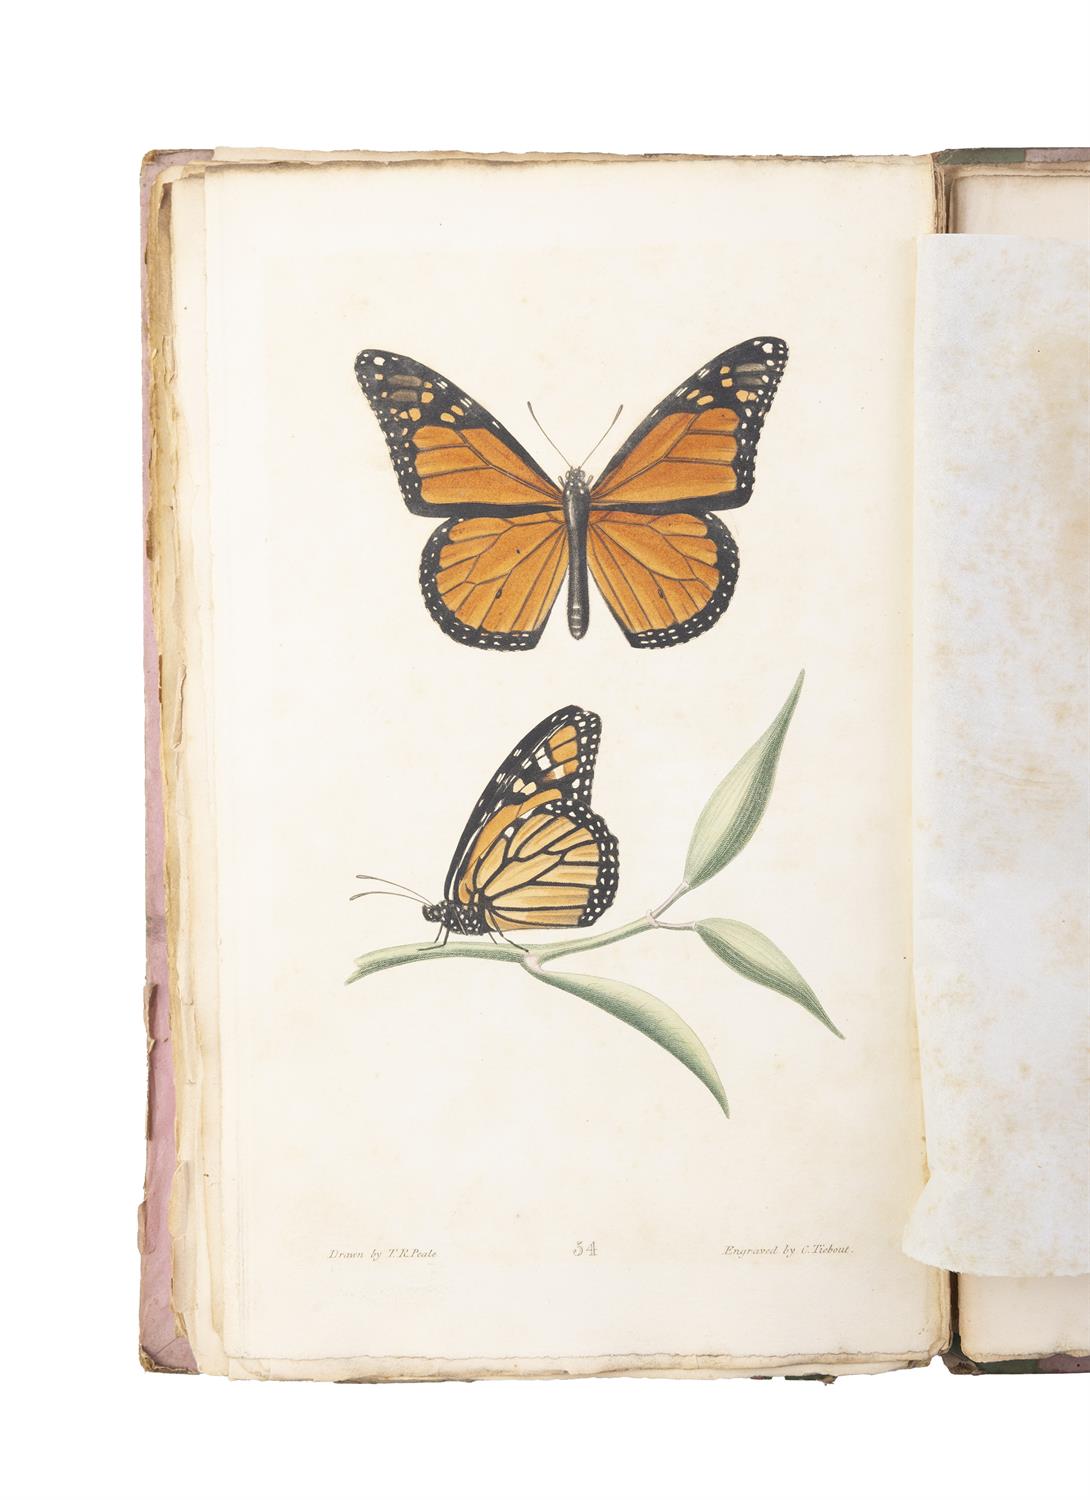 SAY, Thomas [1787-1834] American Entomology or Descriptions of the insects of North America, - Image 7 of 22